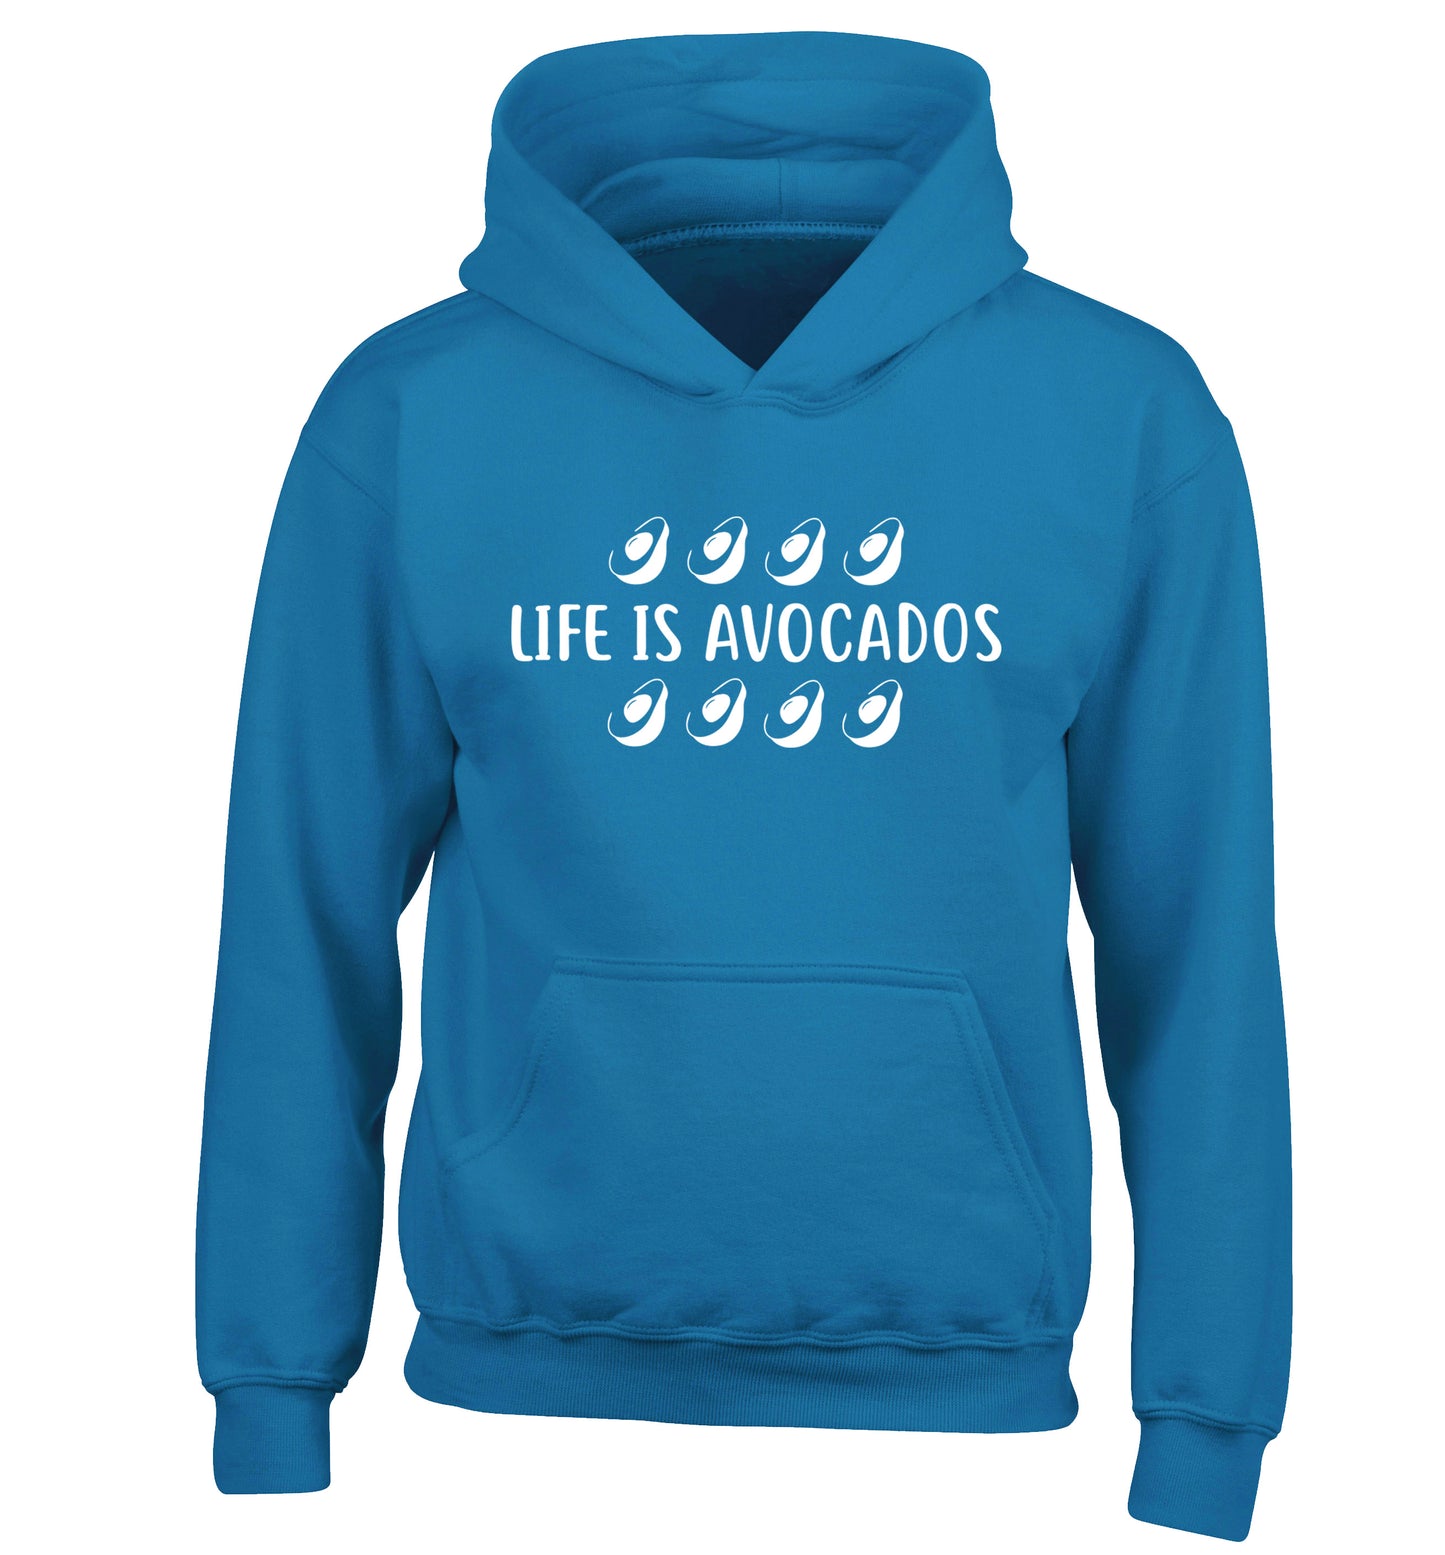 Life is avocados children's blue hoodie 12-14 Years